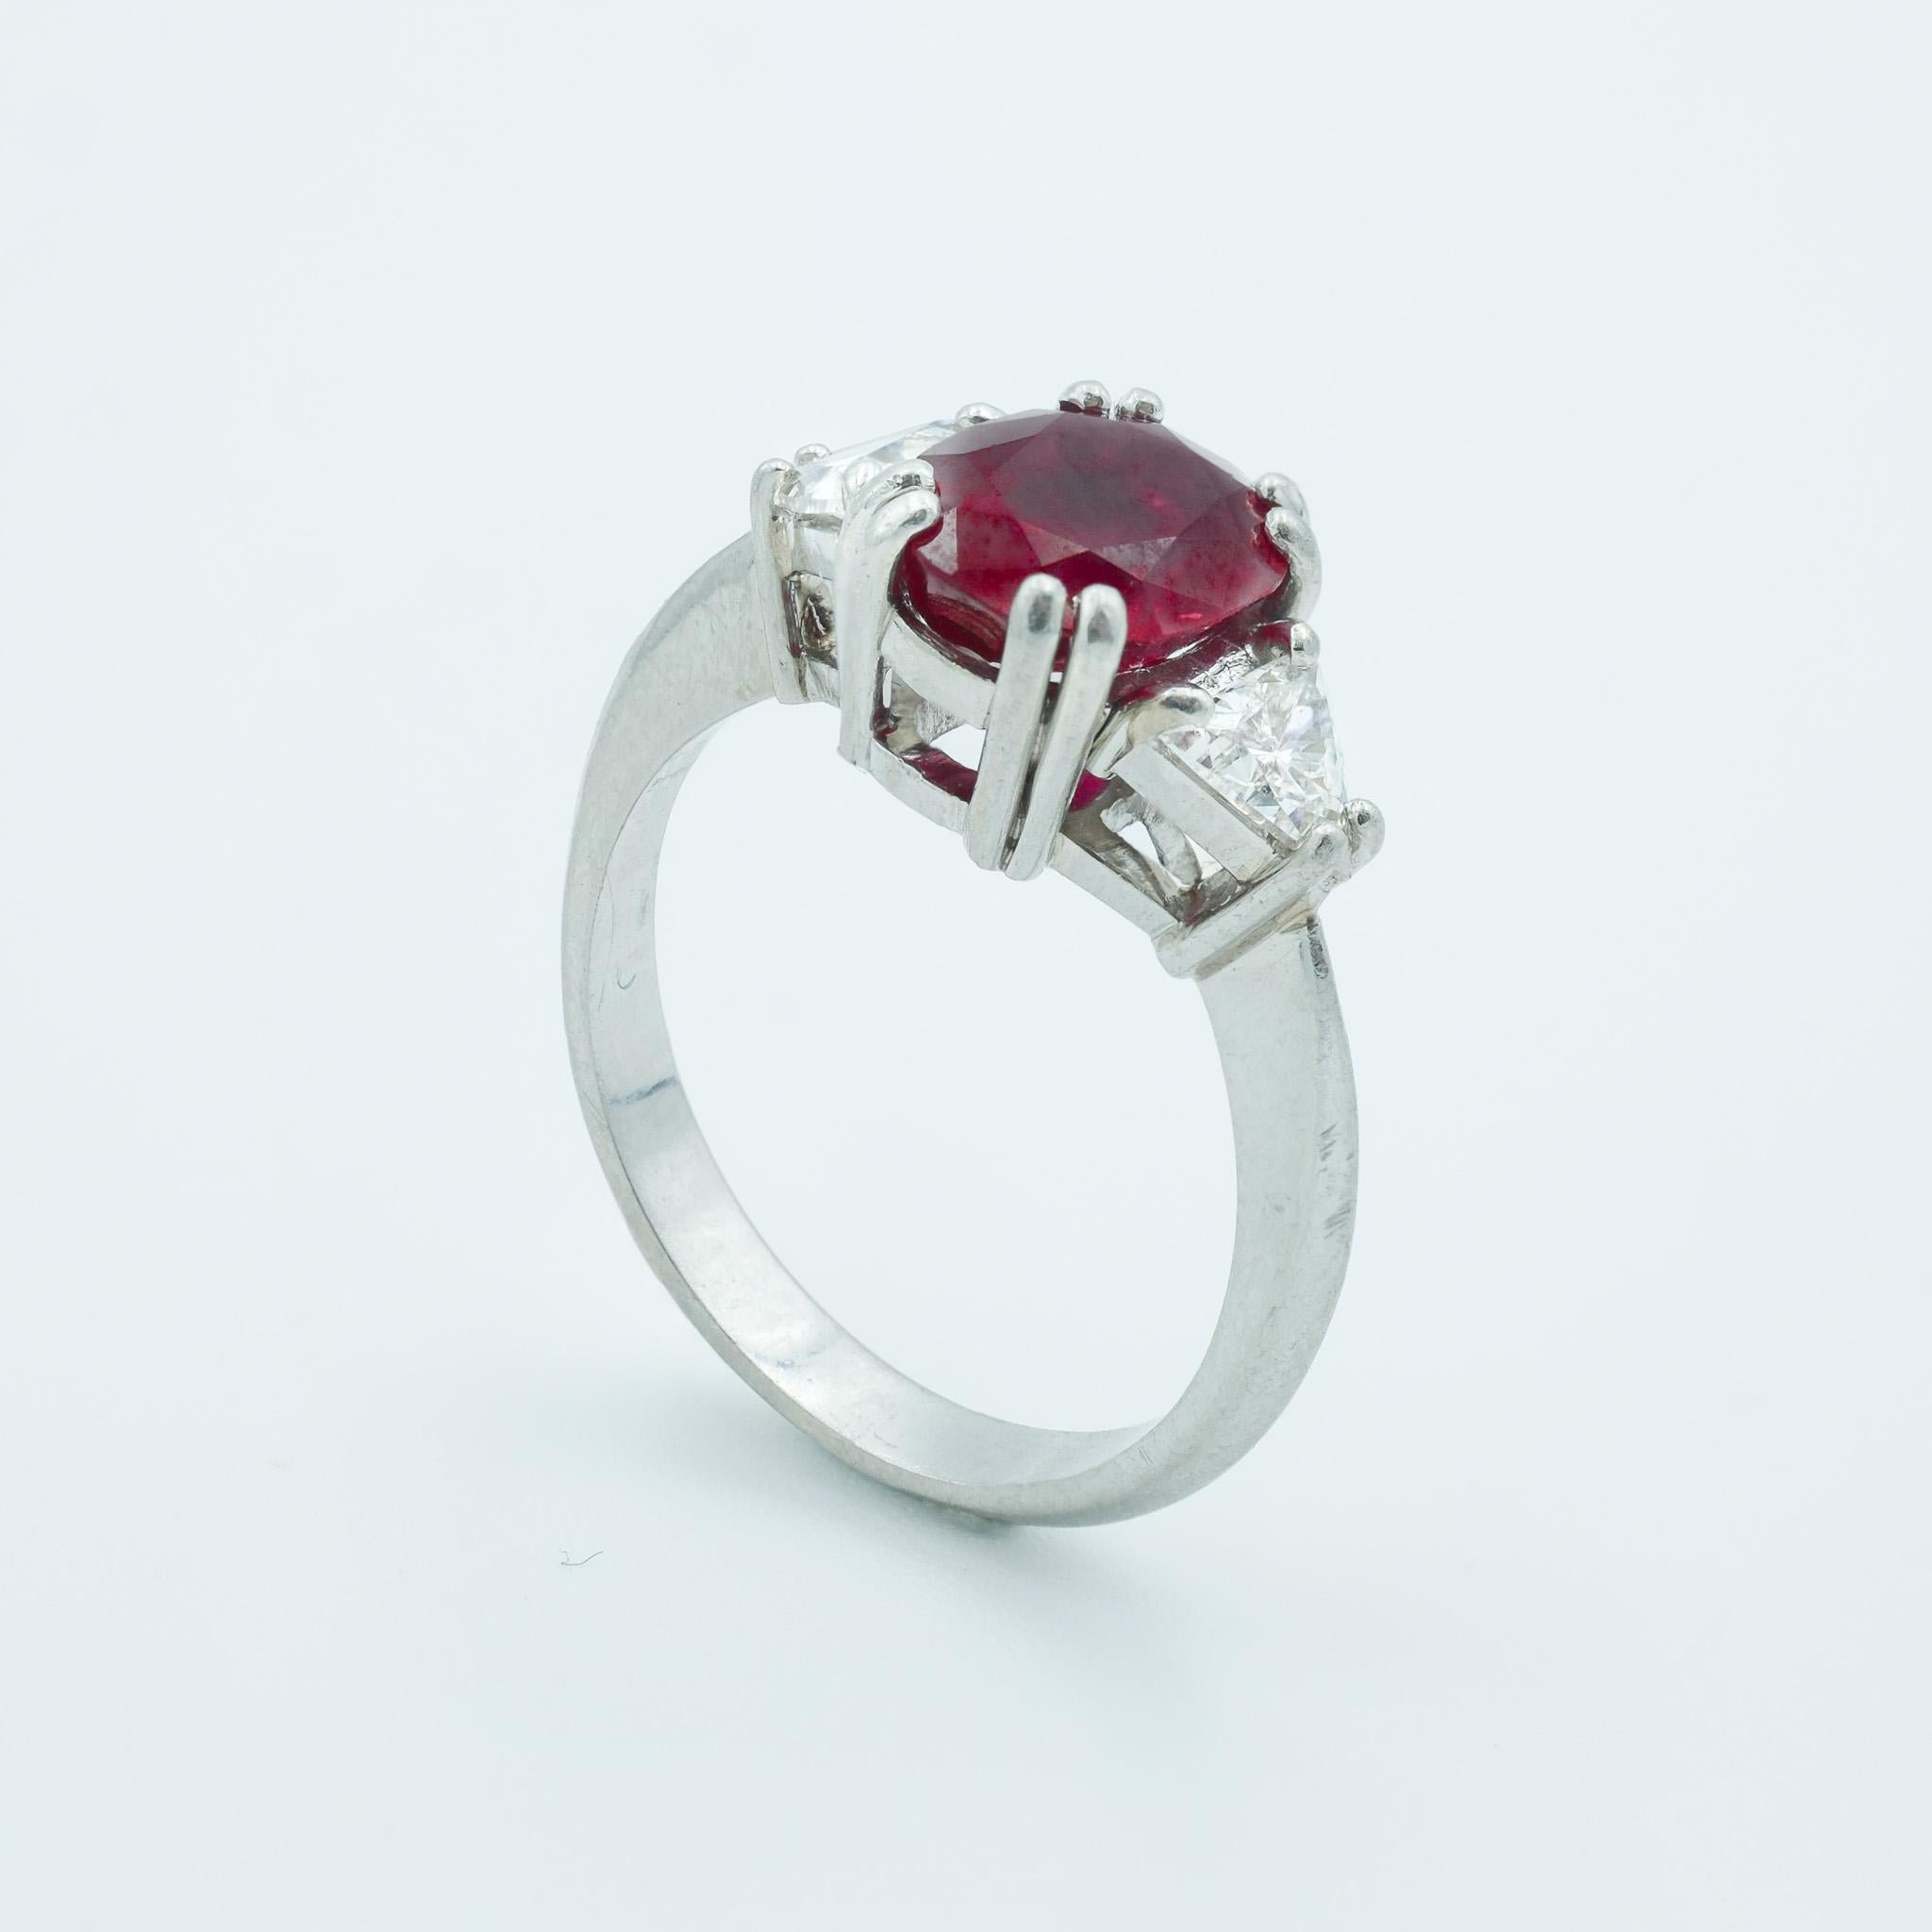 This is a striking French platinum-mounted ring that boasts a luxurious 1.3-carat heated Burma ruby. The ruby exudes a deep, vivid red hue, a hallmark of the finest Burmese rubies, known for their exceptional color and clarity. The ruby is round